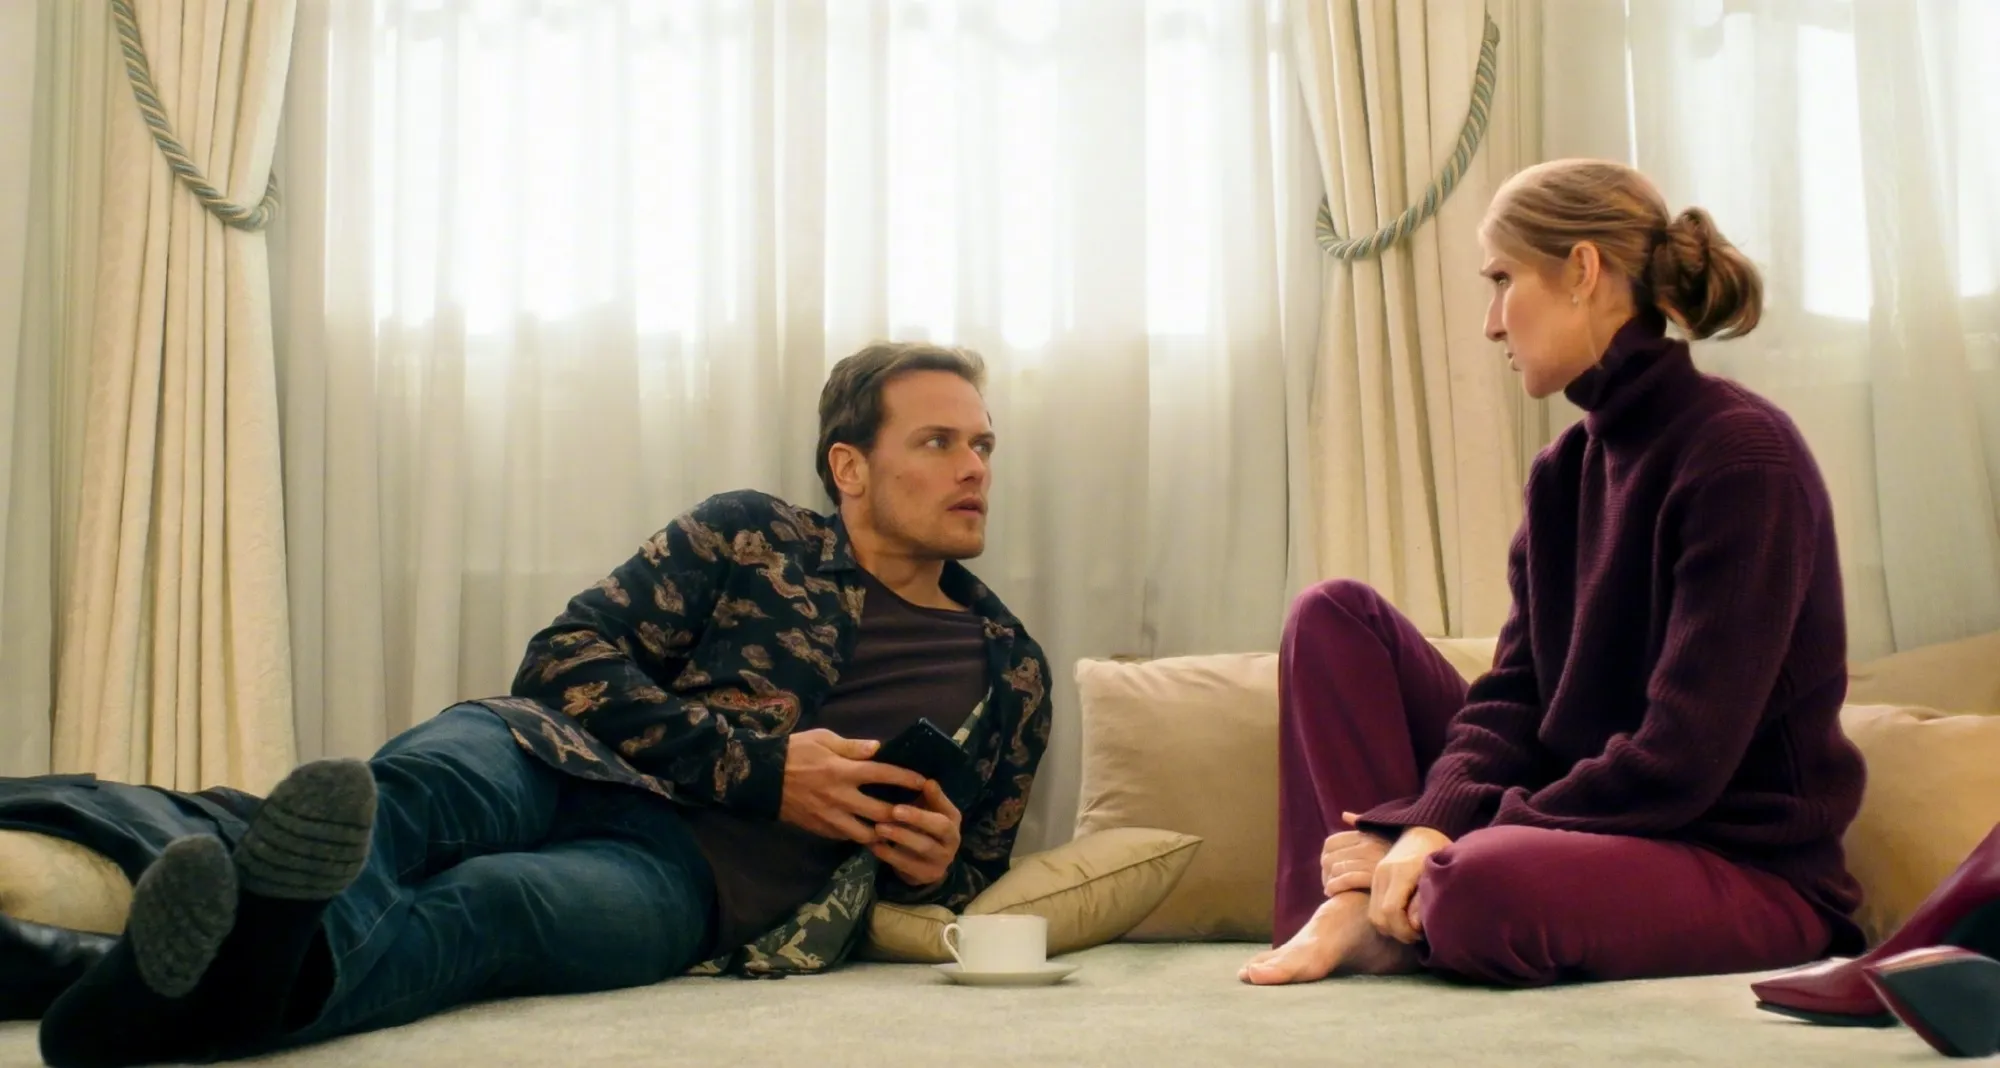 Romantic comedy 'Love Again' starring Sam Heughan and Céline Dion delayed until May 12 in Northern America | FMV6